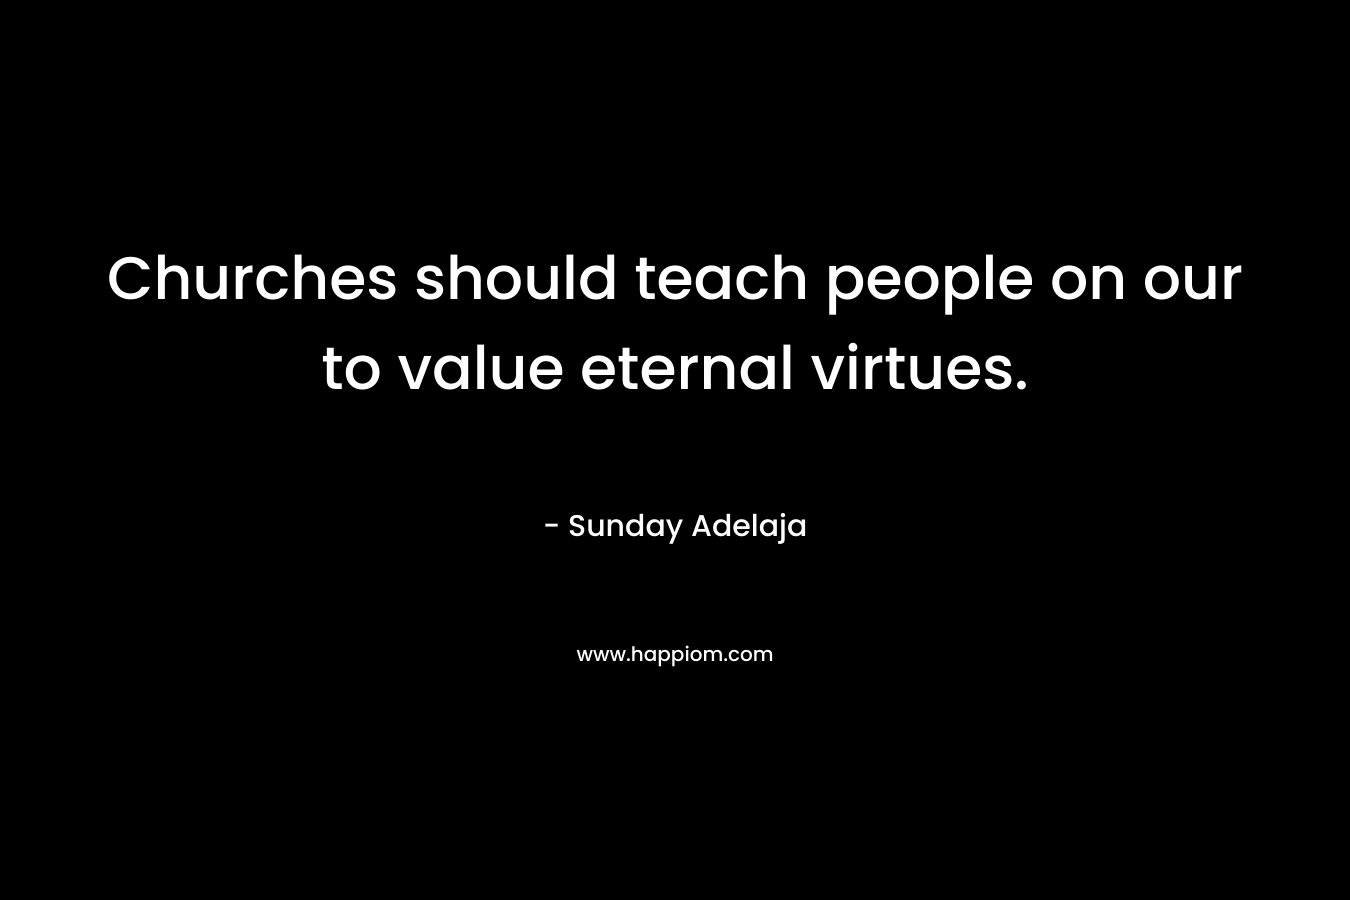 Churches should teach people on our to value eternal virtues.